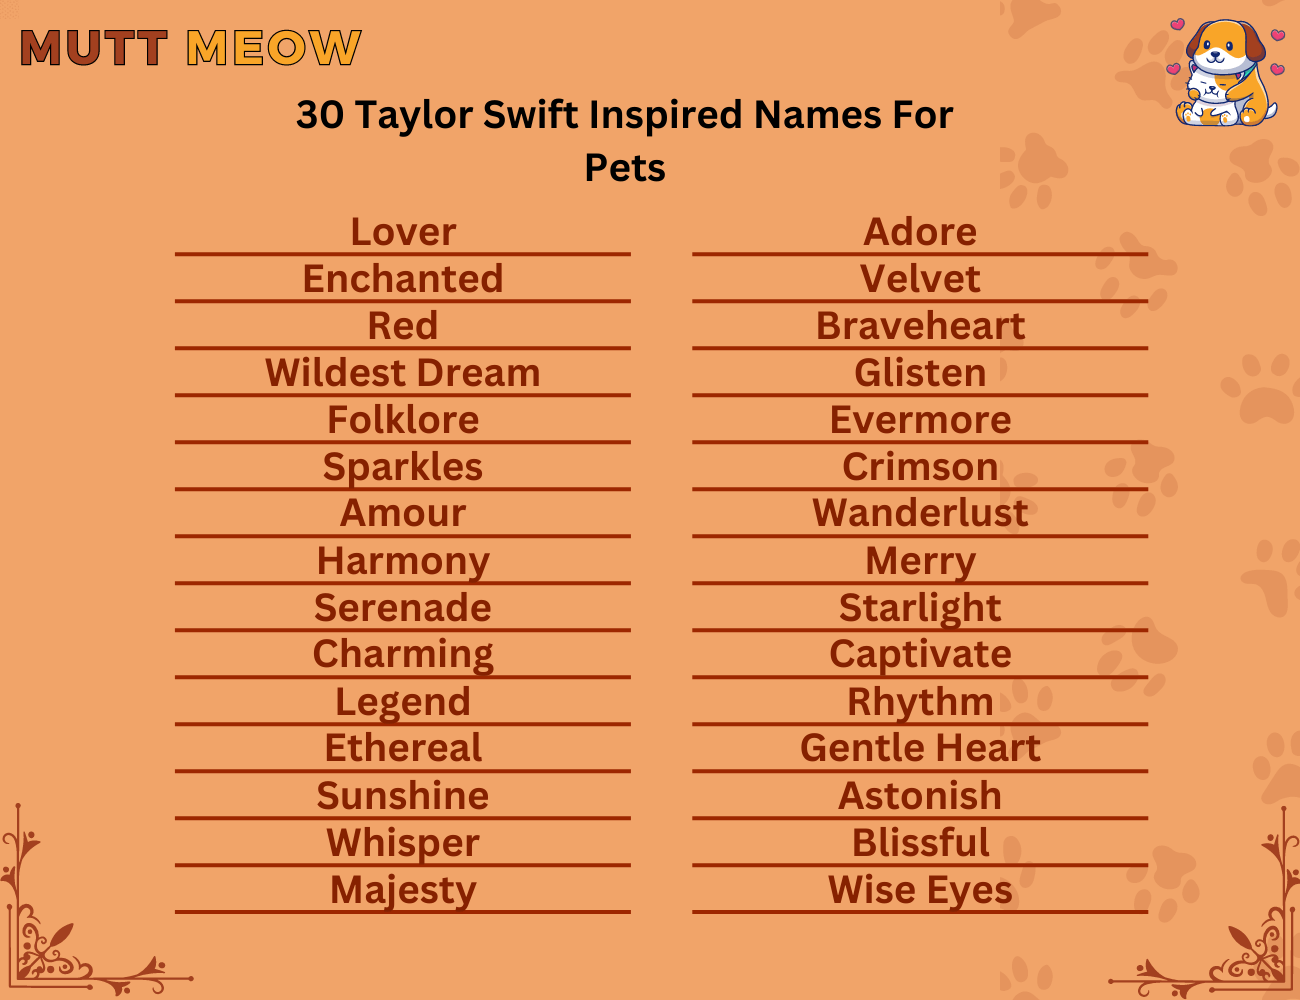 30 Taylor Swift Inspired Names For Pets